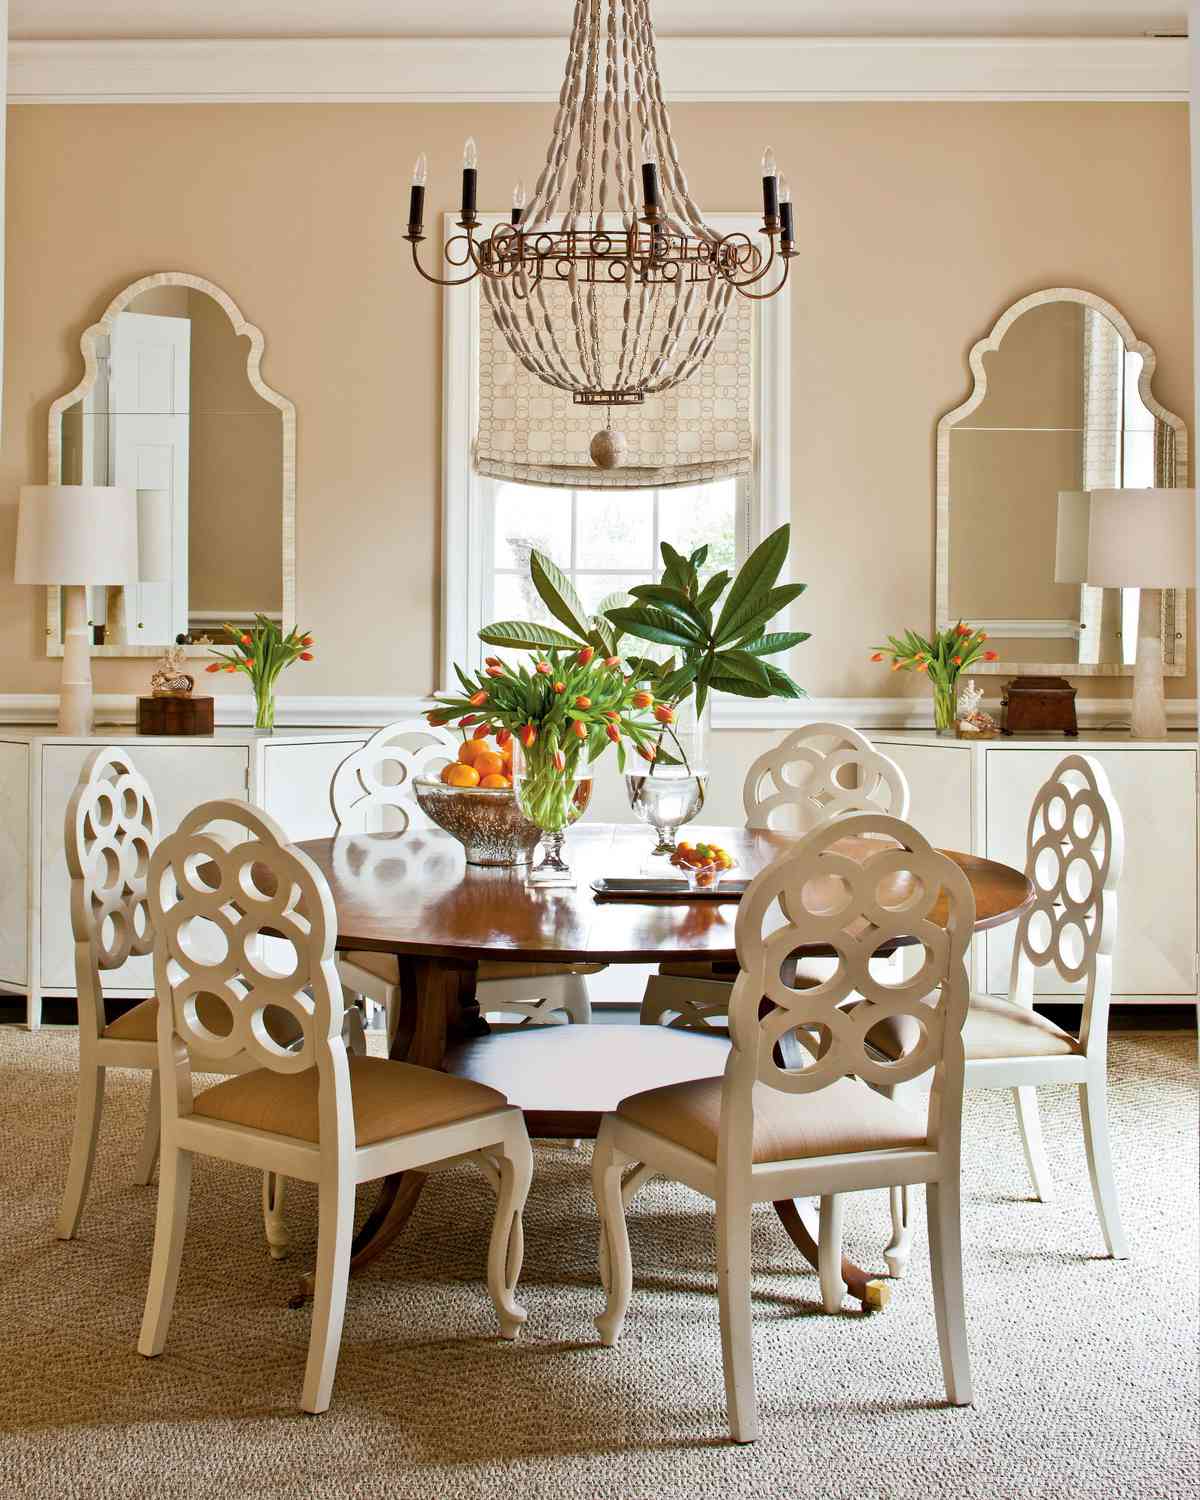 A large round table in a square dining room makes conversations easier and most have leaves for extra seating.